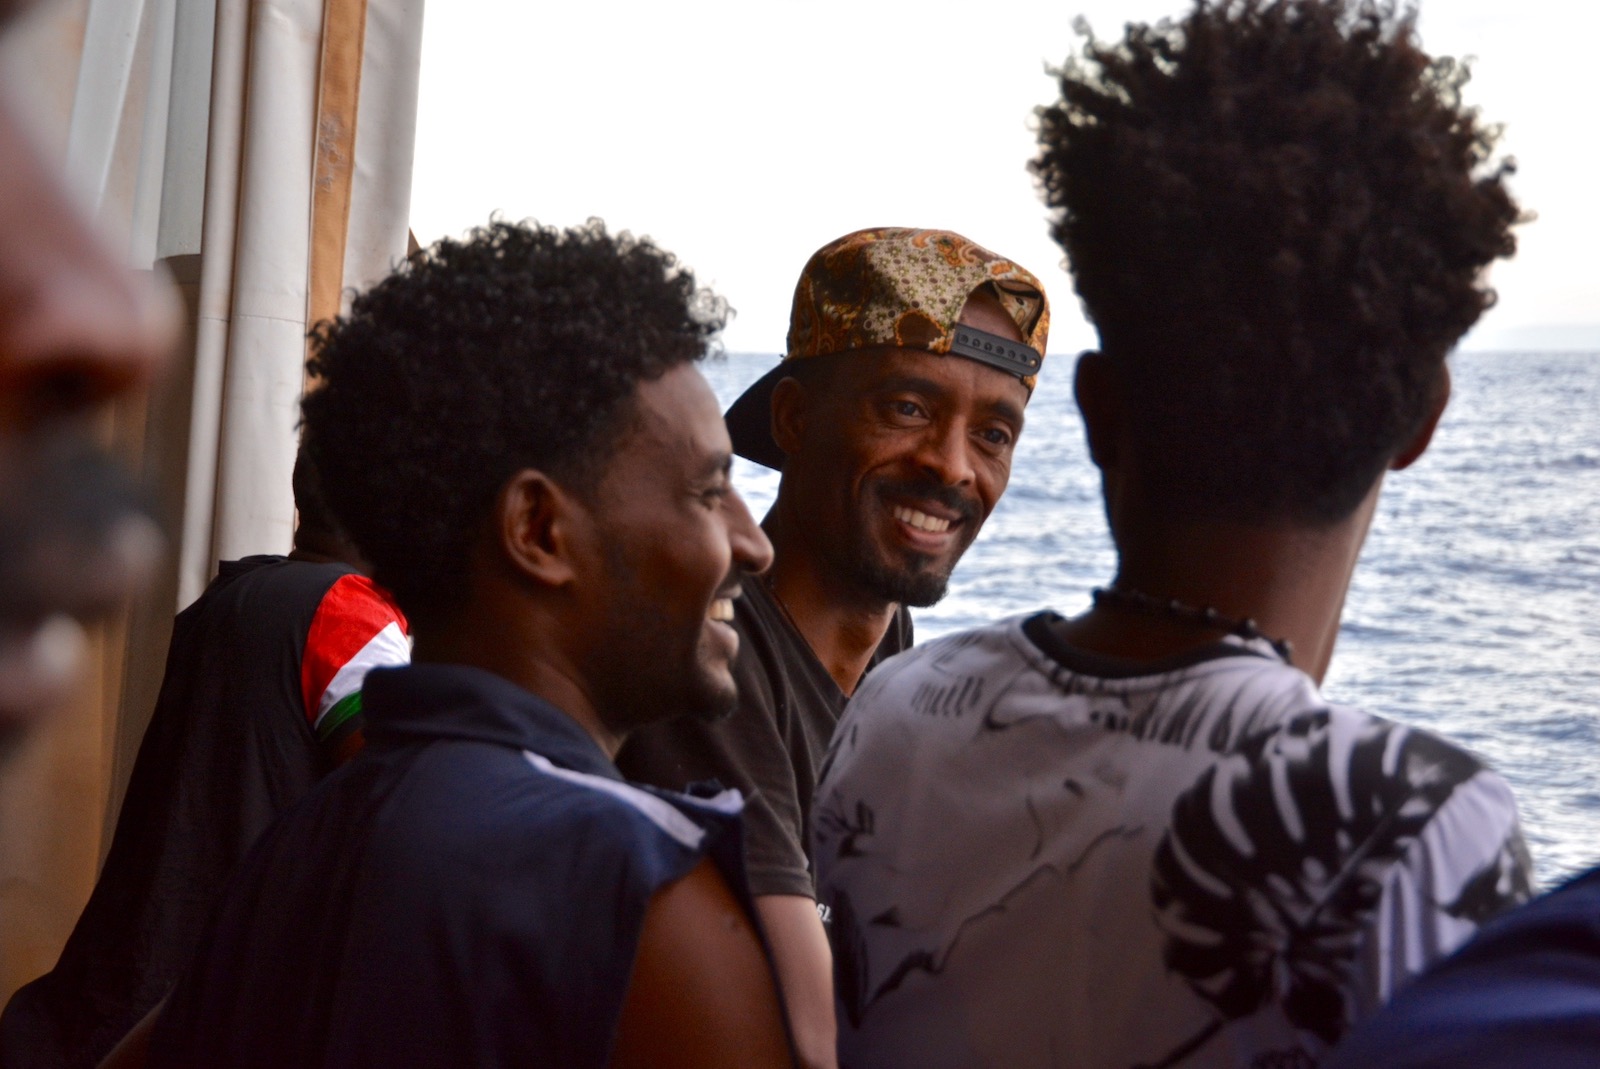 Three men talking and smiling on the deck of a ship